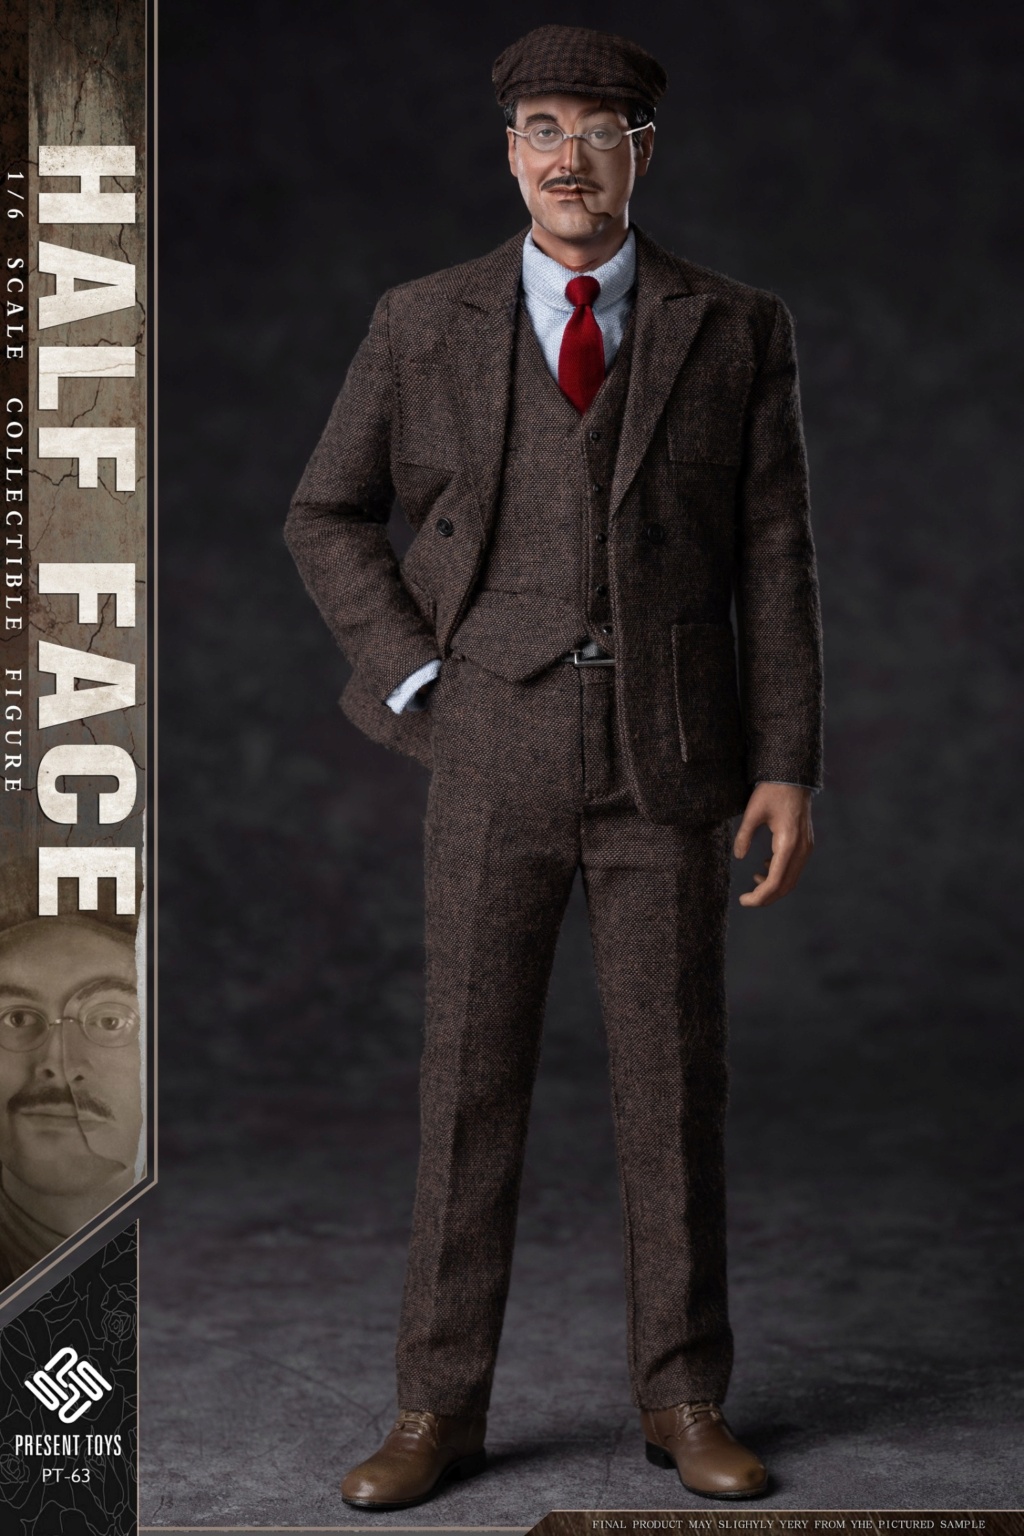 Cable-Based - NEW PRODUCT: PRESENT TOYS  1:6 collectiblefigure – Half Face. 19270411